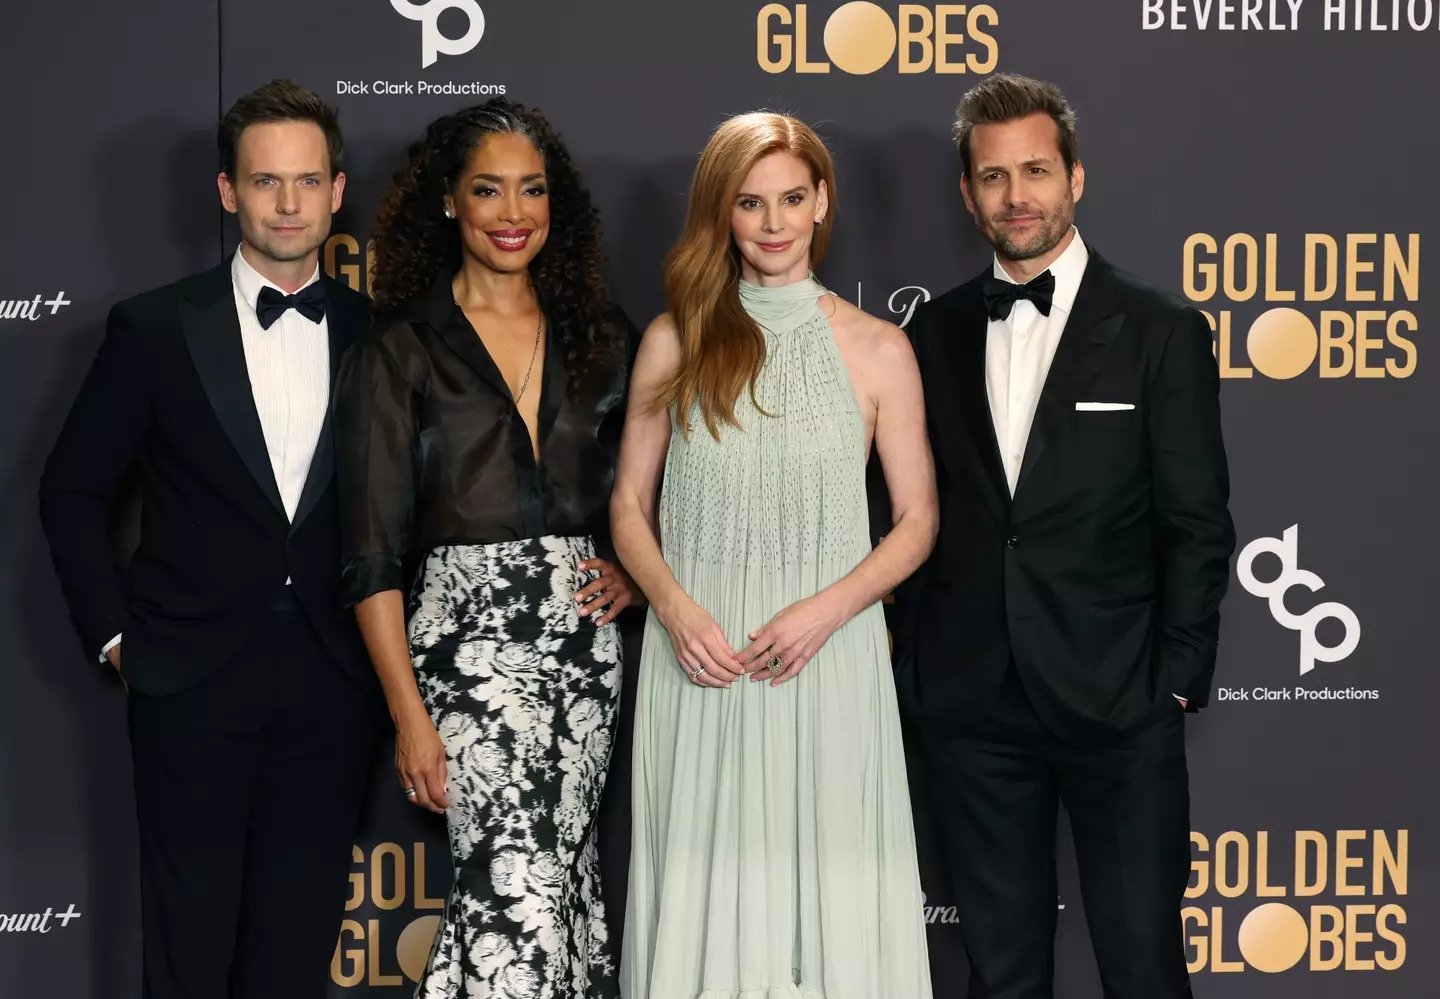 The cast of Suits reunited at the Golden Globes on Sunday.